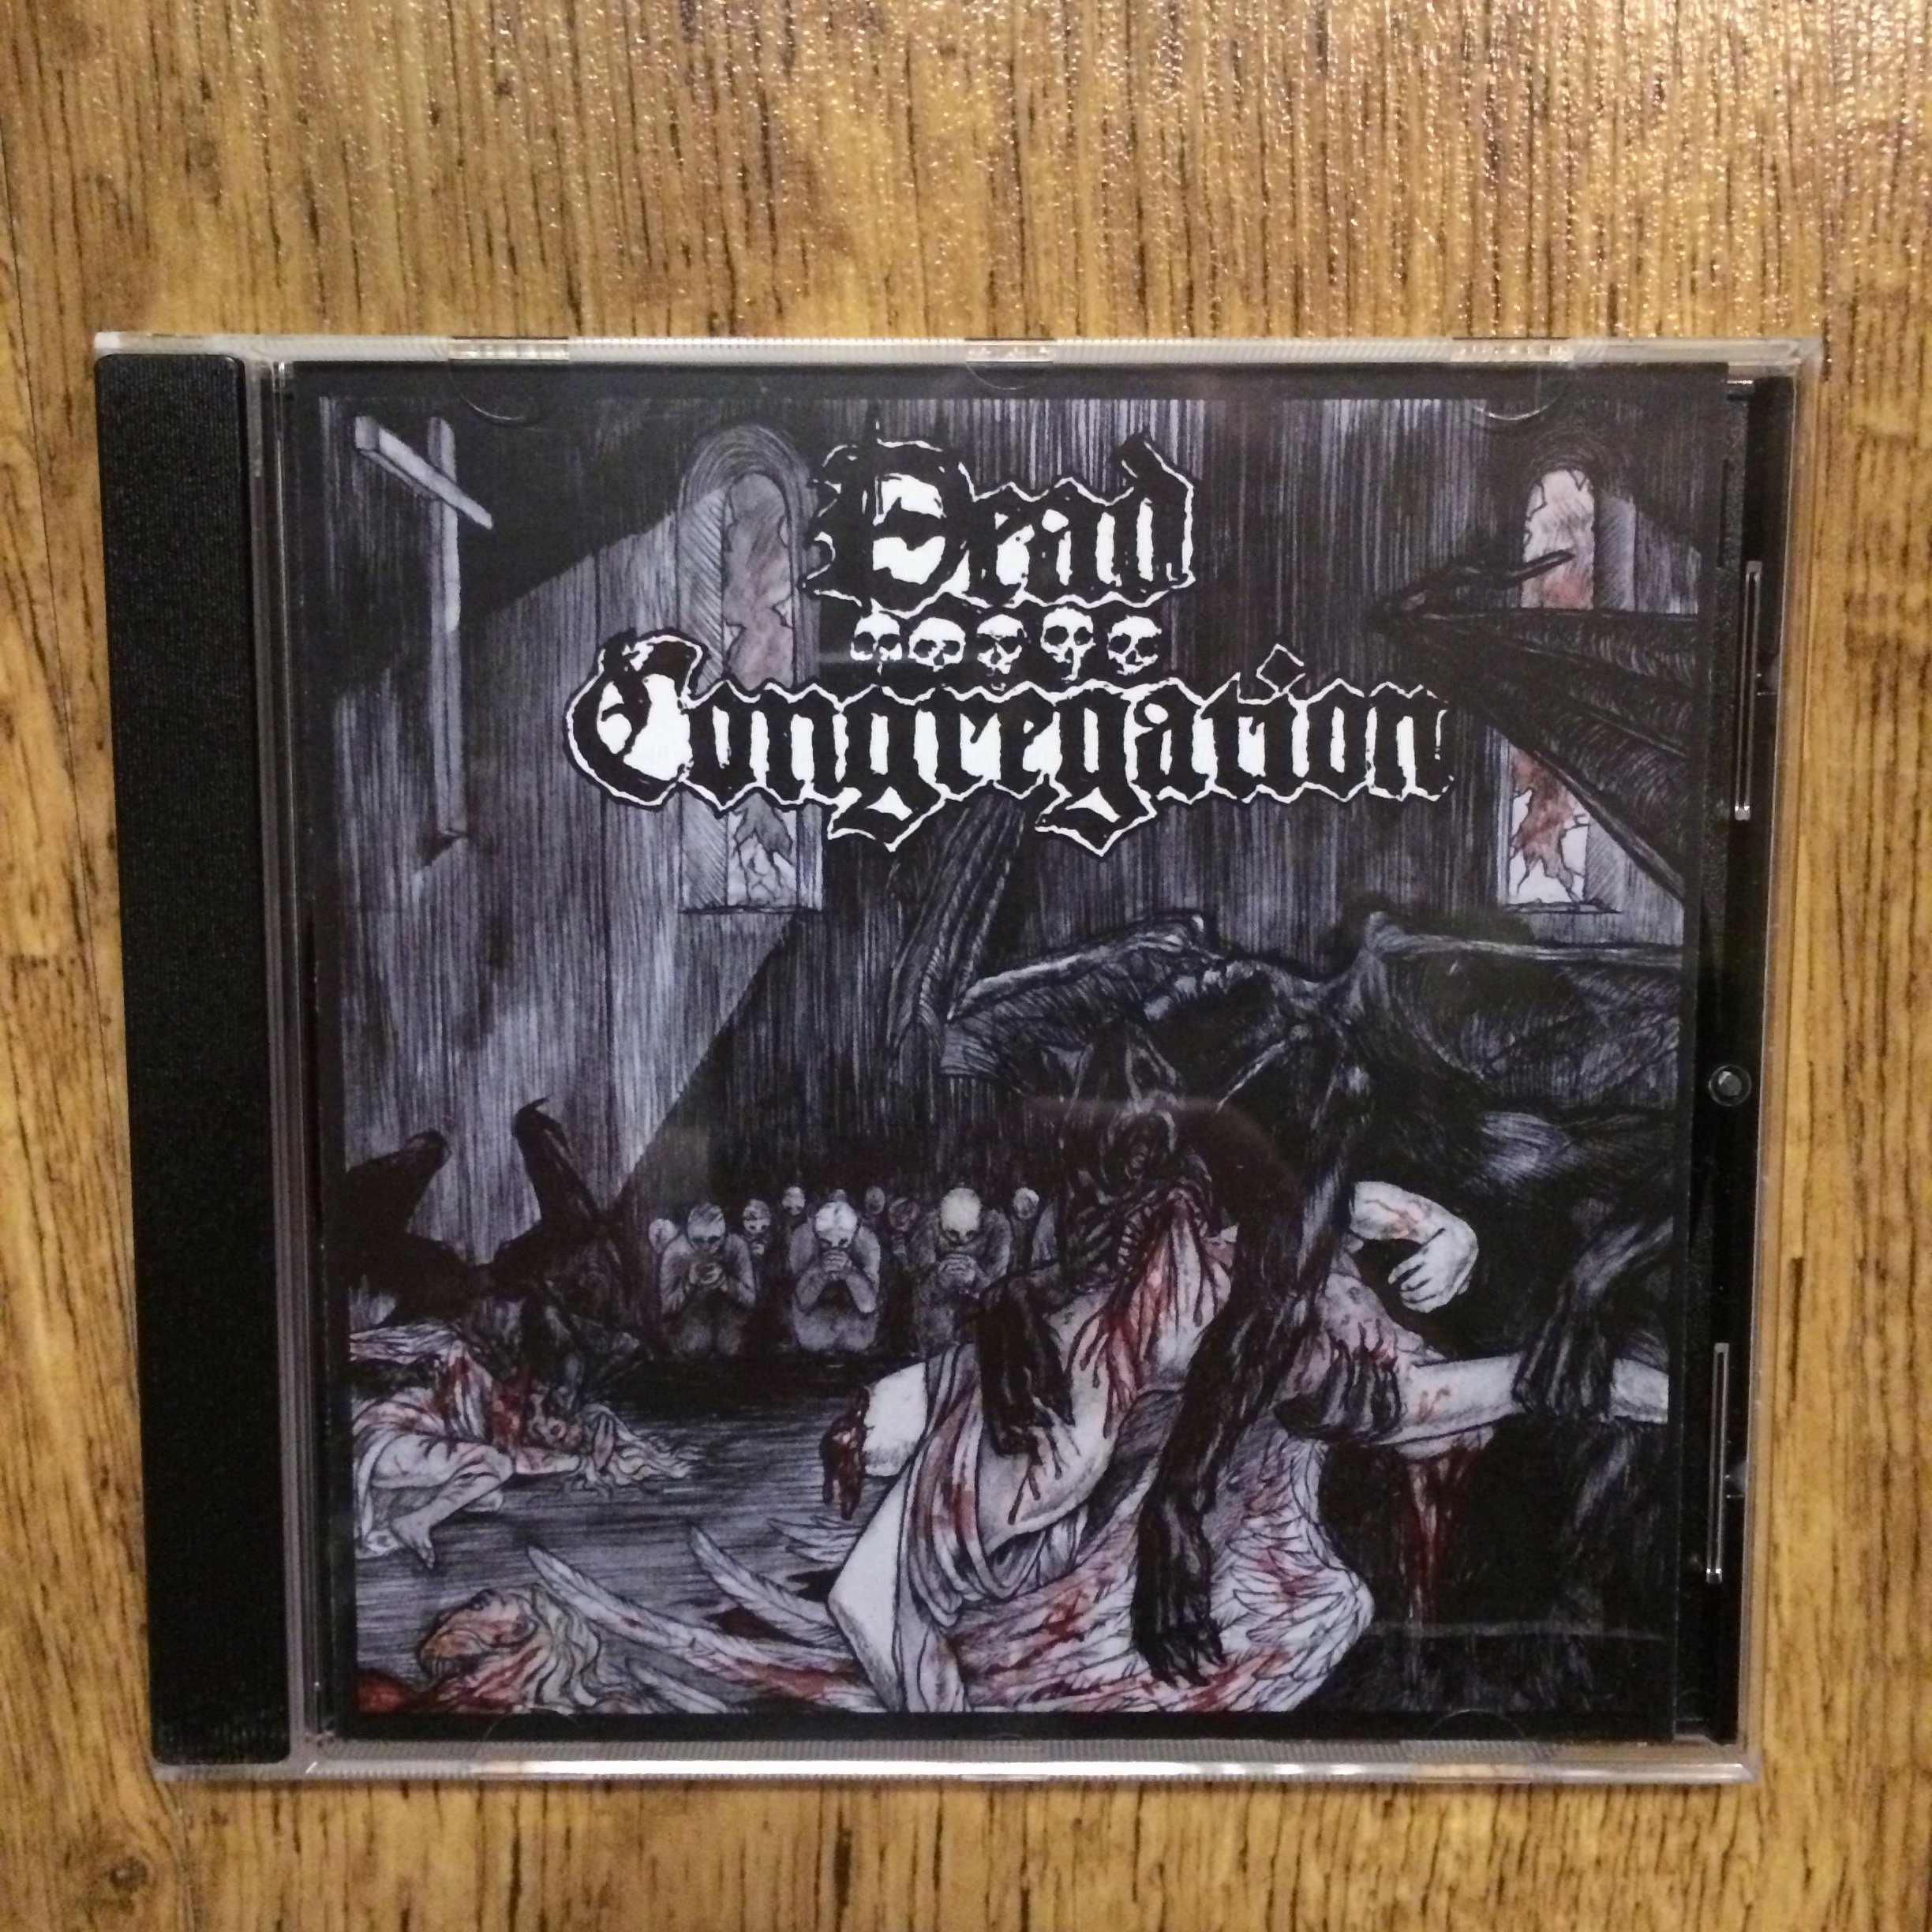 Photo of the Dead Congregation - "Purifying Consecrated Ground" CD